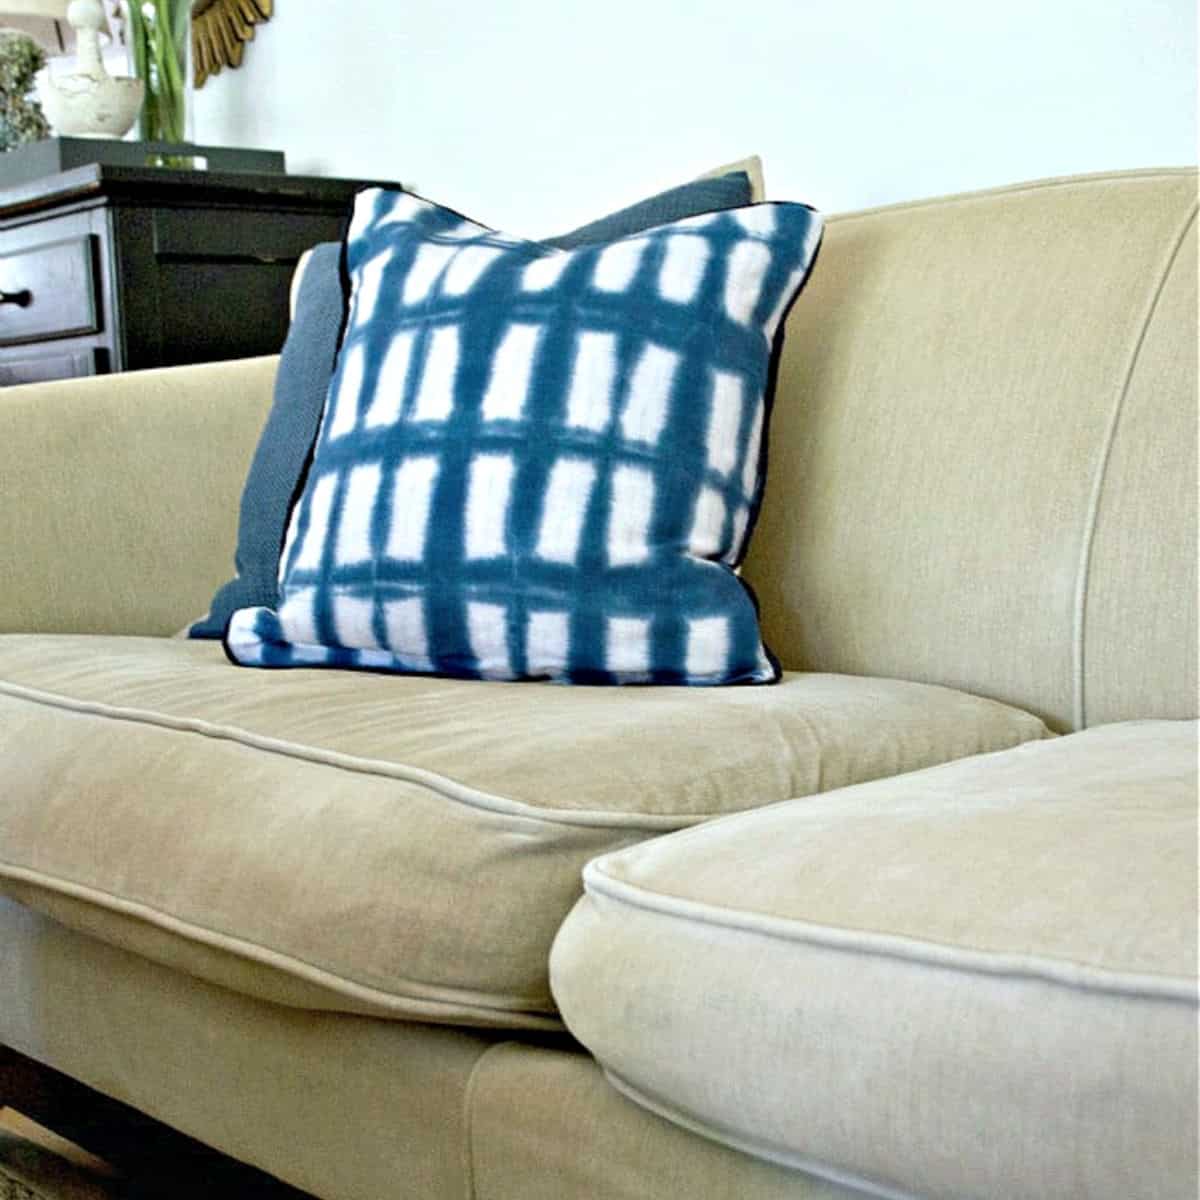 How To Fix Sagging Couch Cushions, How To Repair A Sagging Sofa Cushion